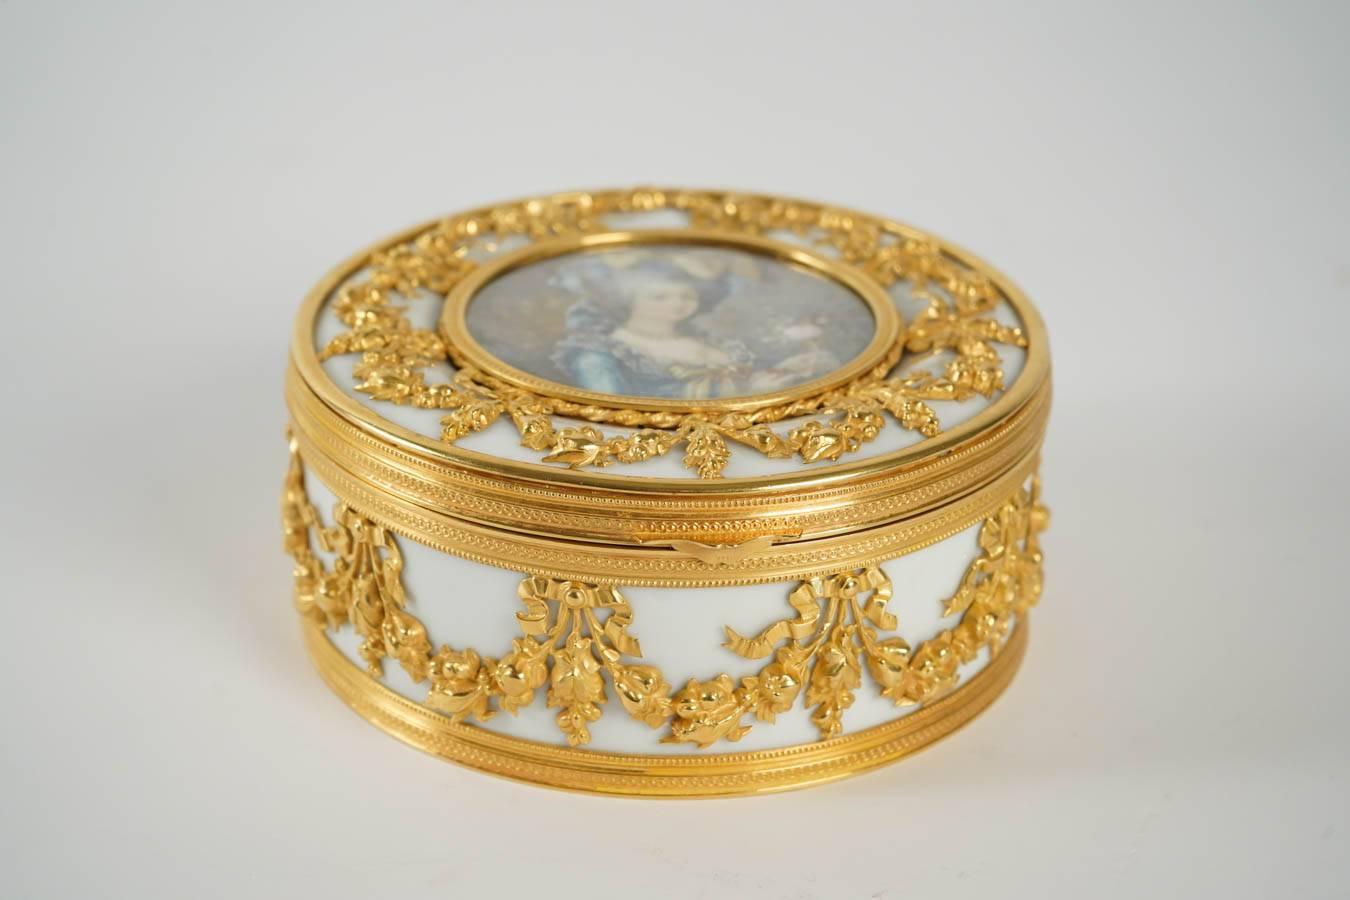 High quality French round jewelry casket with porcelain and gilt bronze
in the middle miniature nicely painted.